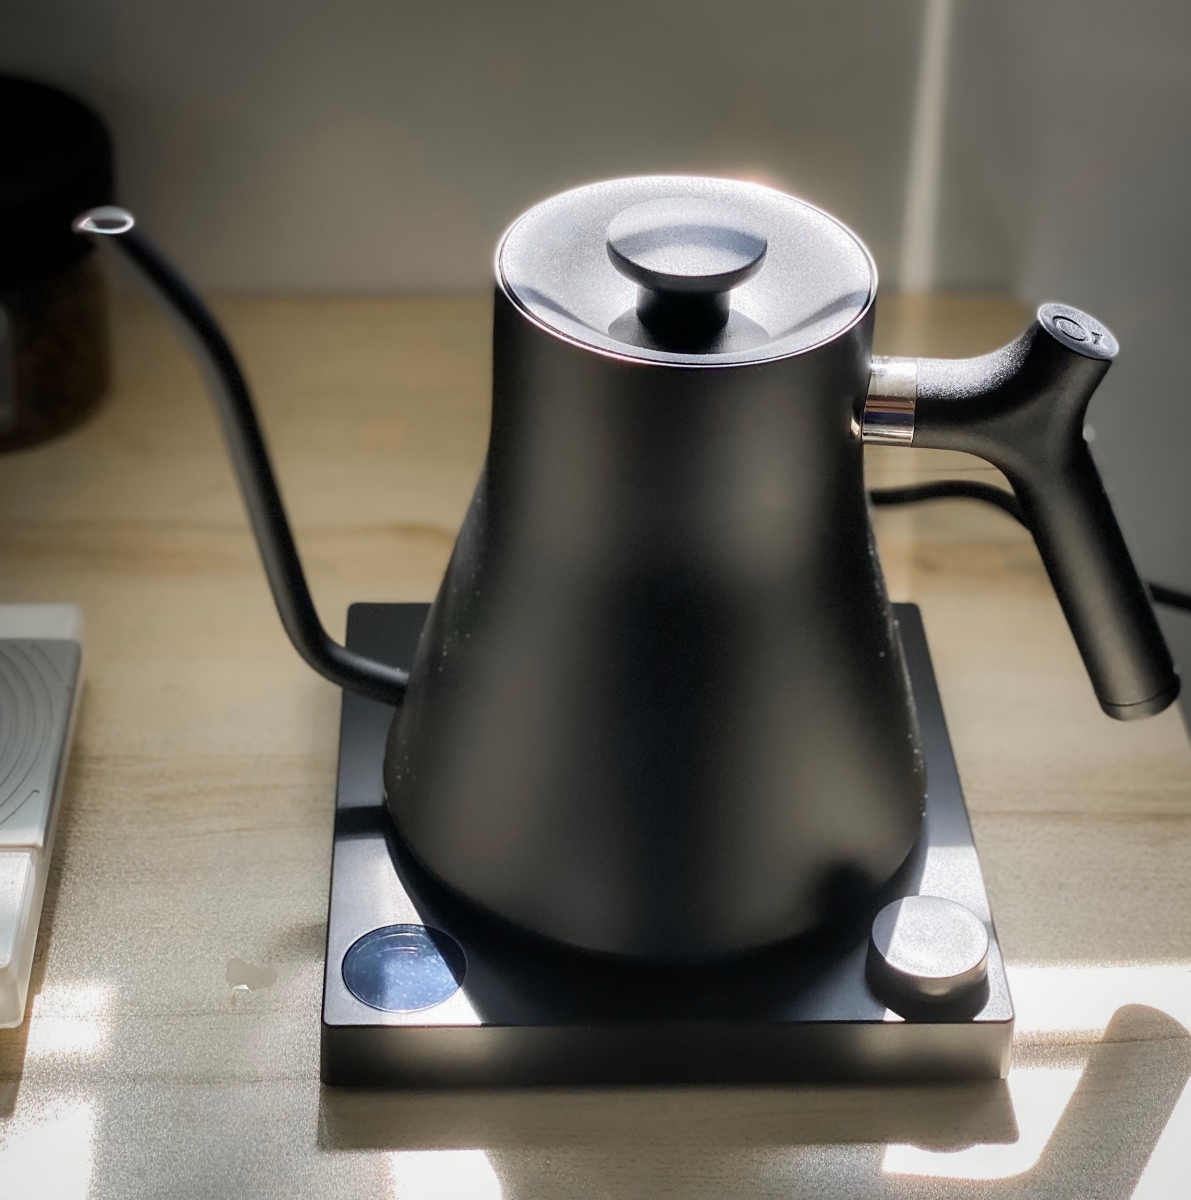 Fellow Stagg EKG Review: Is This Electric Kettle Worth The Money?